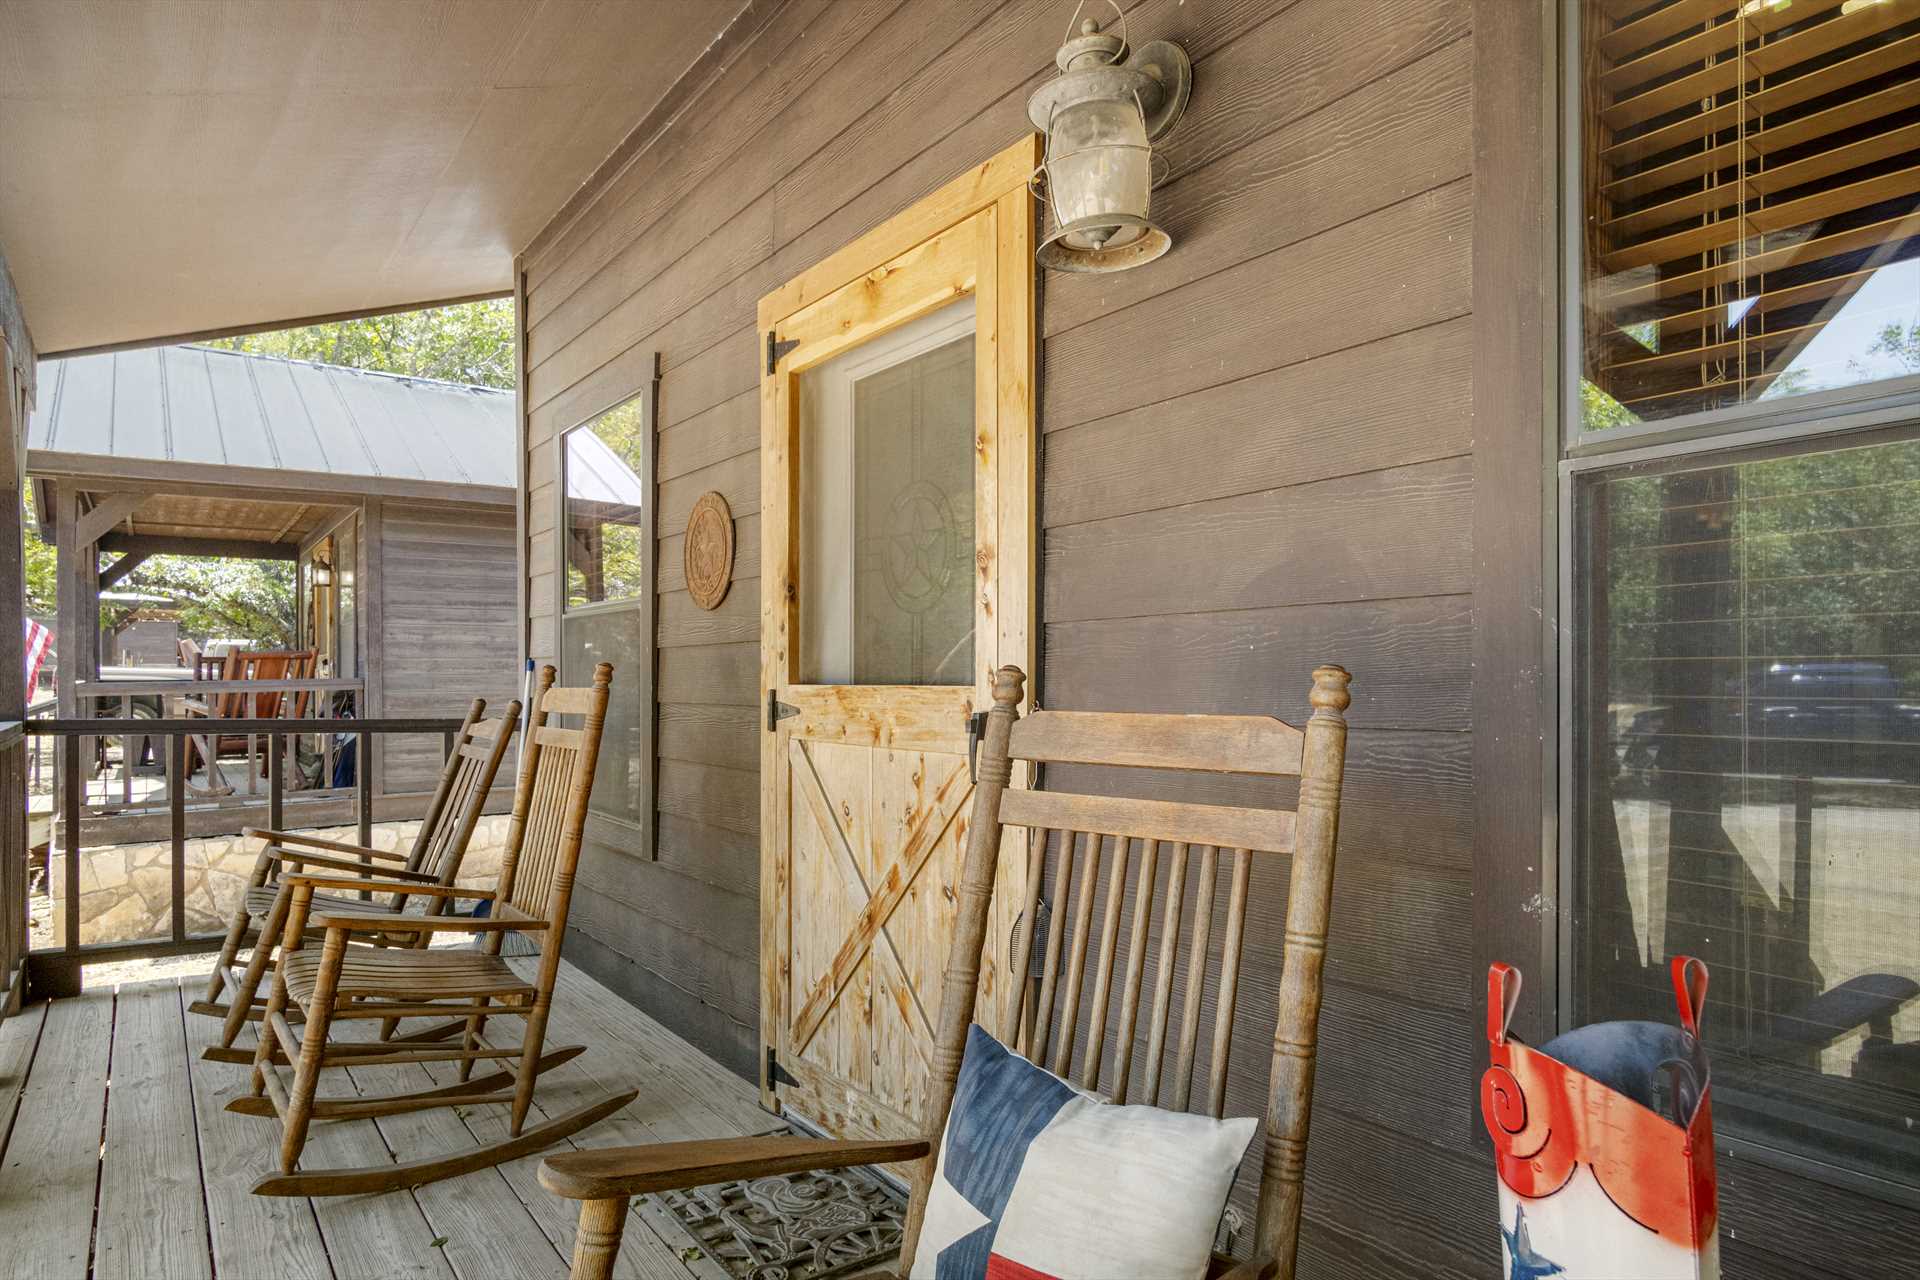                                                 Enjoy your morning coffee in a comfortable rocking chair on the shaded porch!